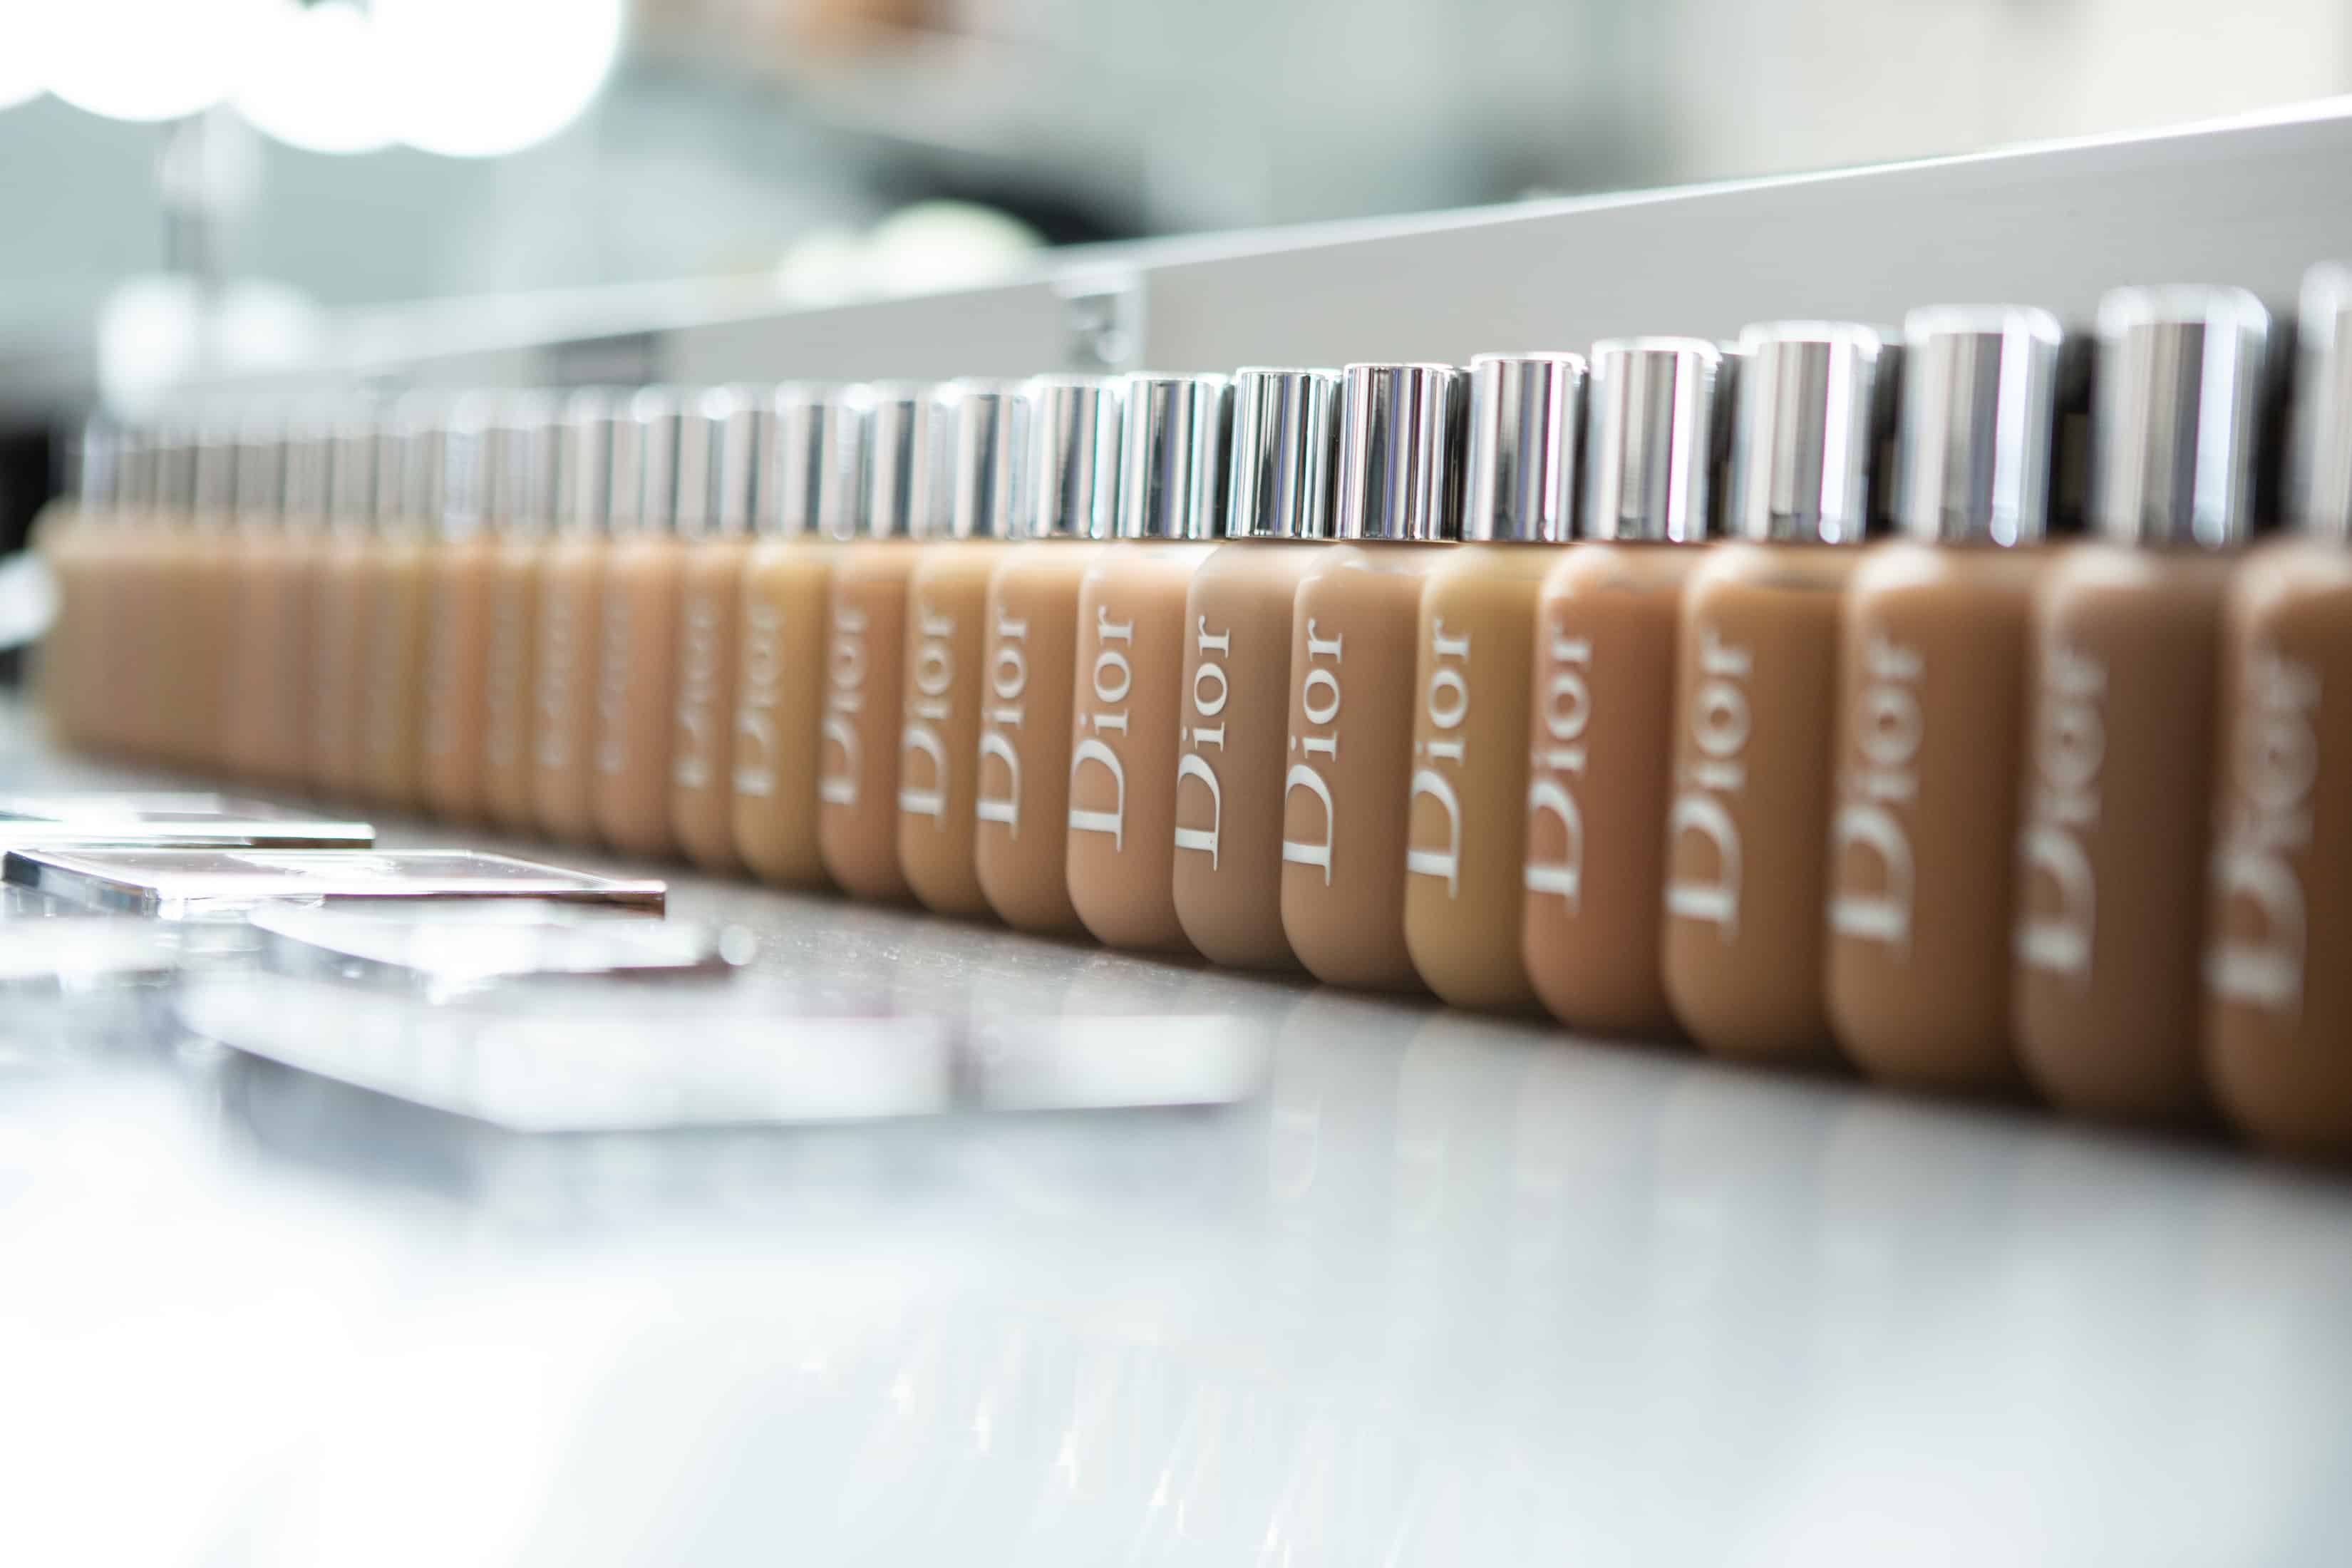 Dior's Backstage Makeup Collection Is 